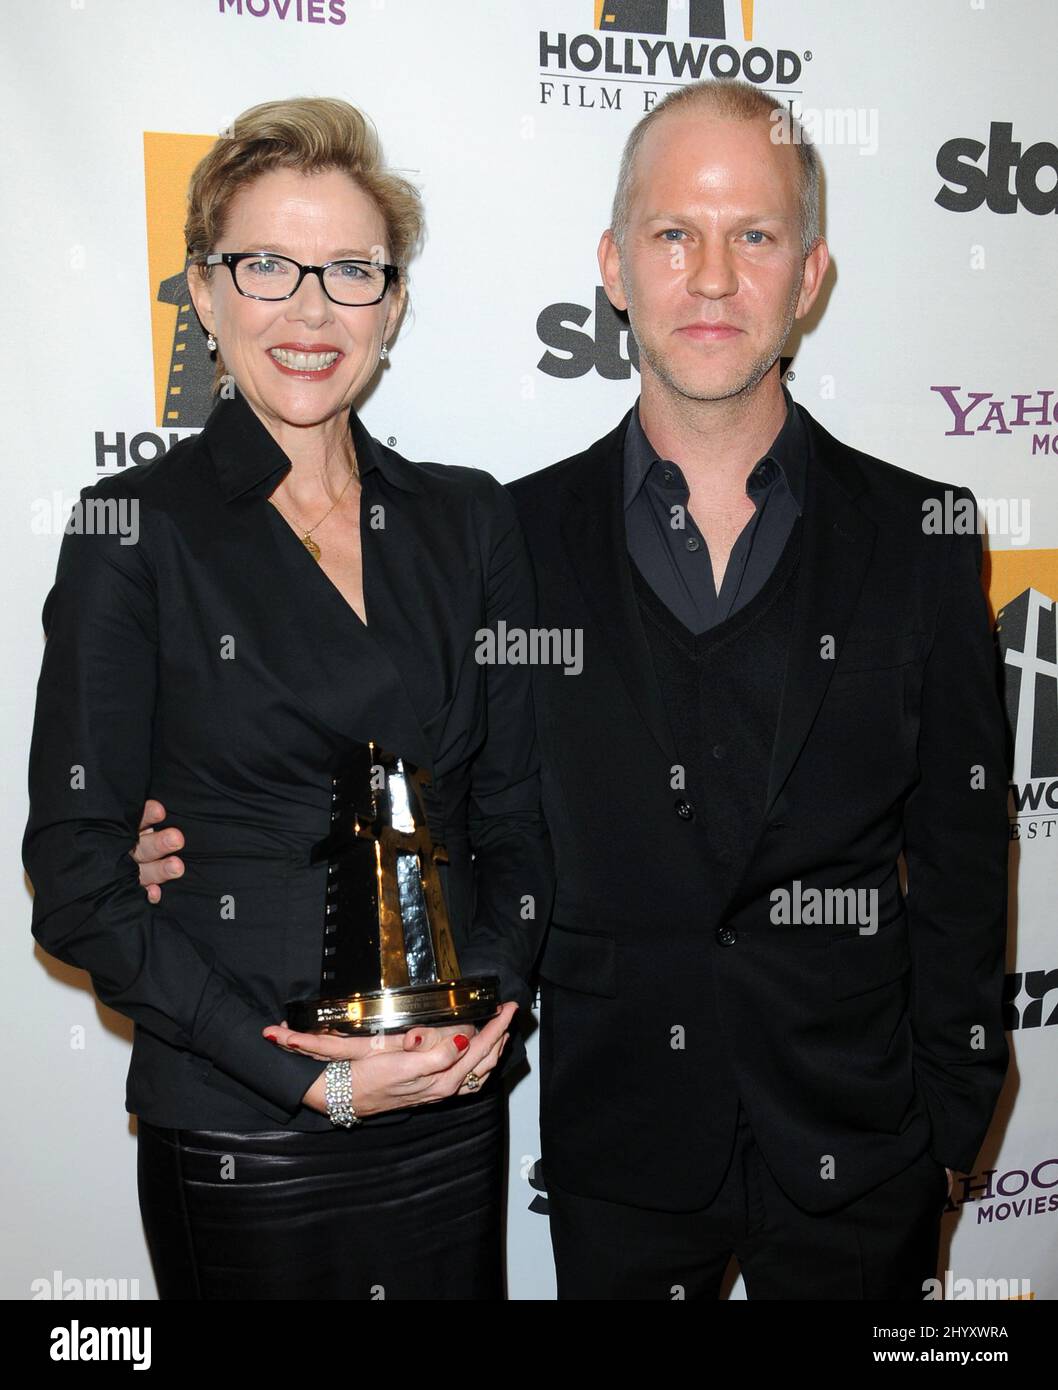 Annette Bening and Ryan Murphy at the 14th Annual Hollywood Awards Gala held at the Beverly Hilton Hotel, Beverly Hills, California. Stock Photo